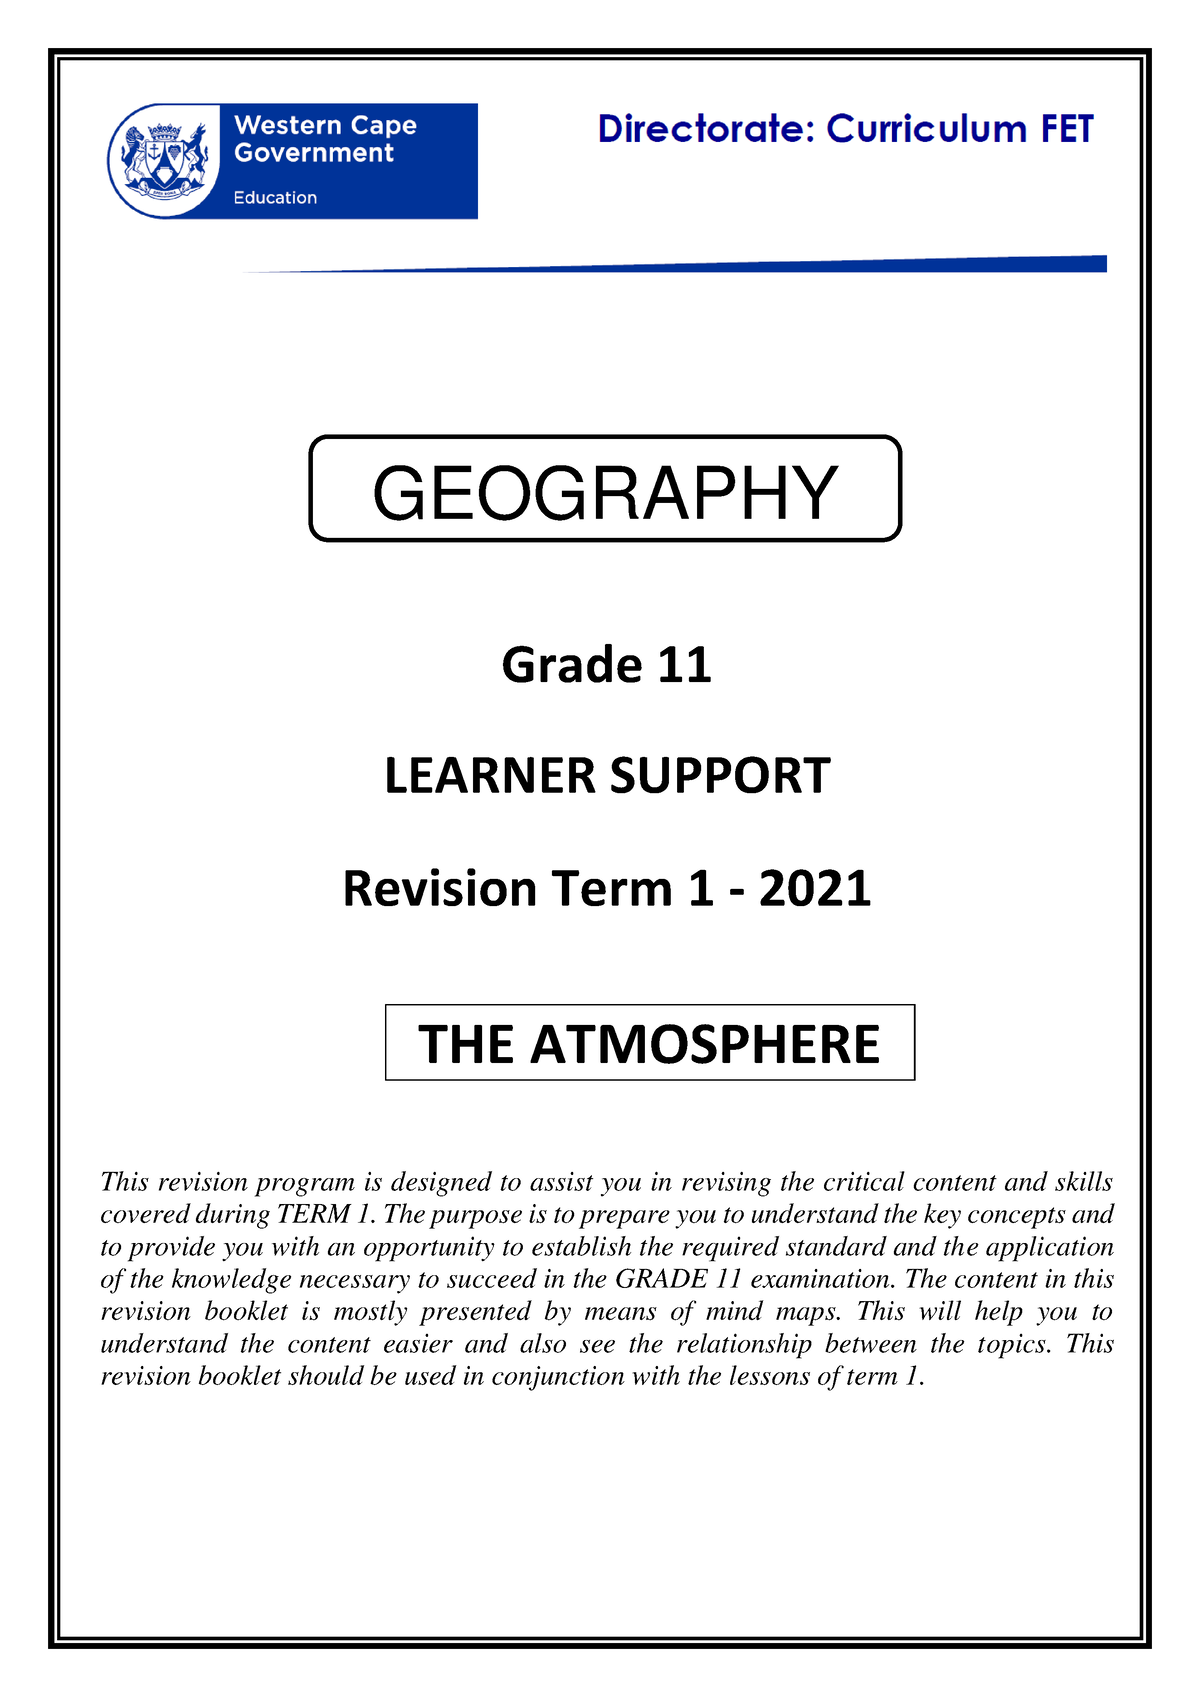 do geography assignment